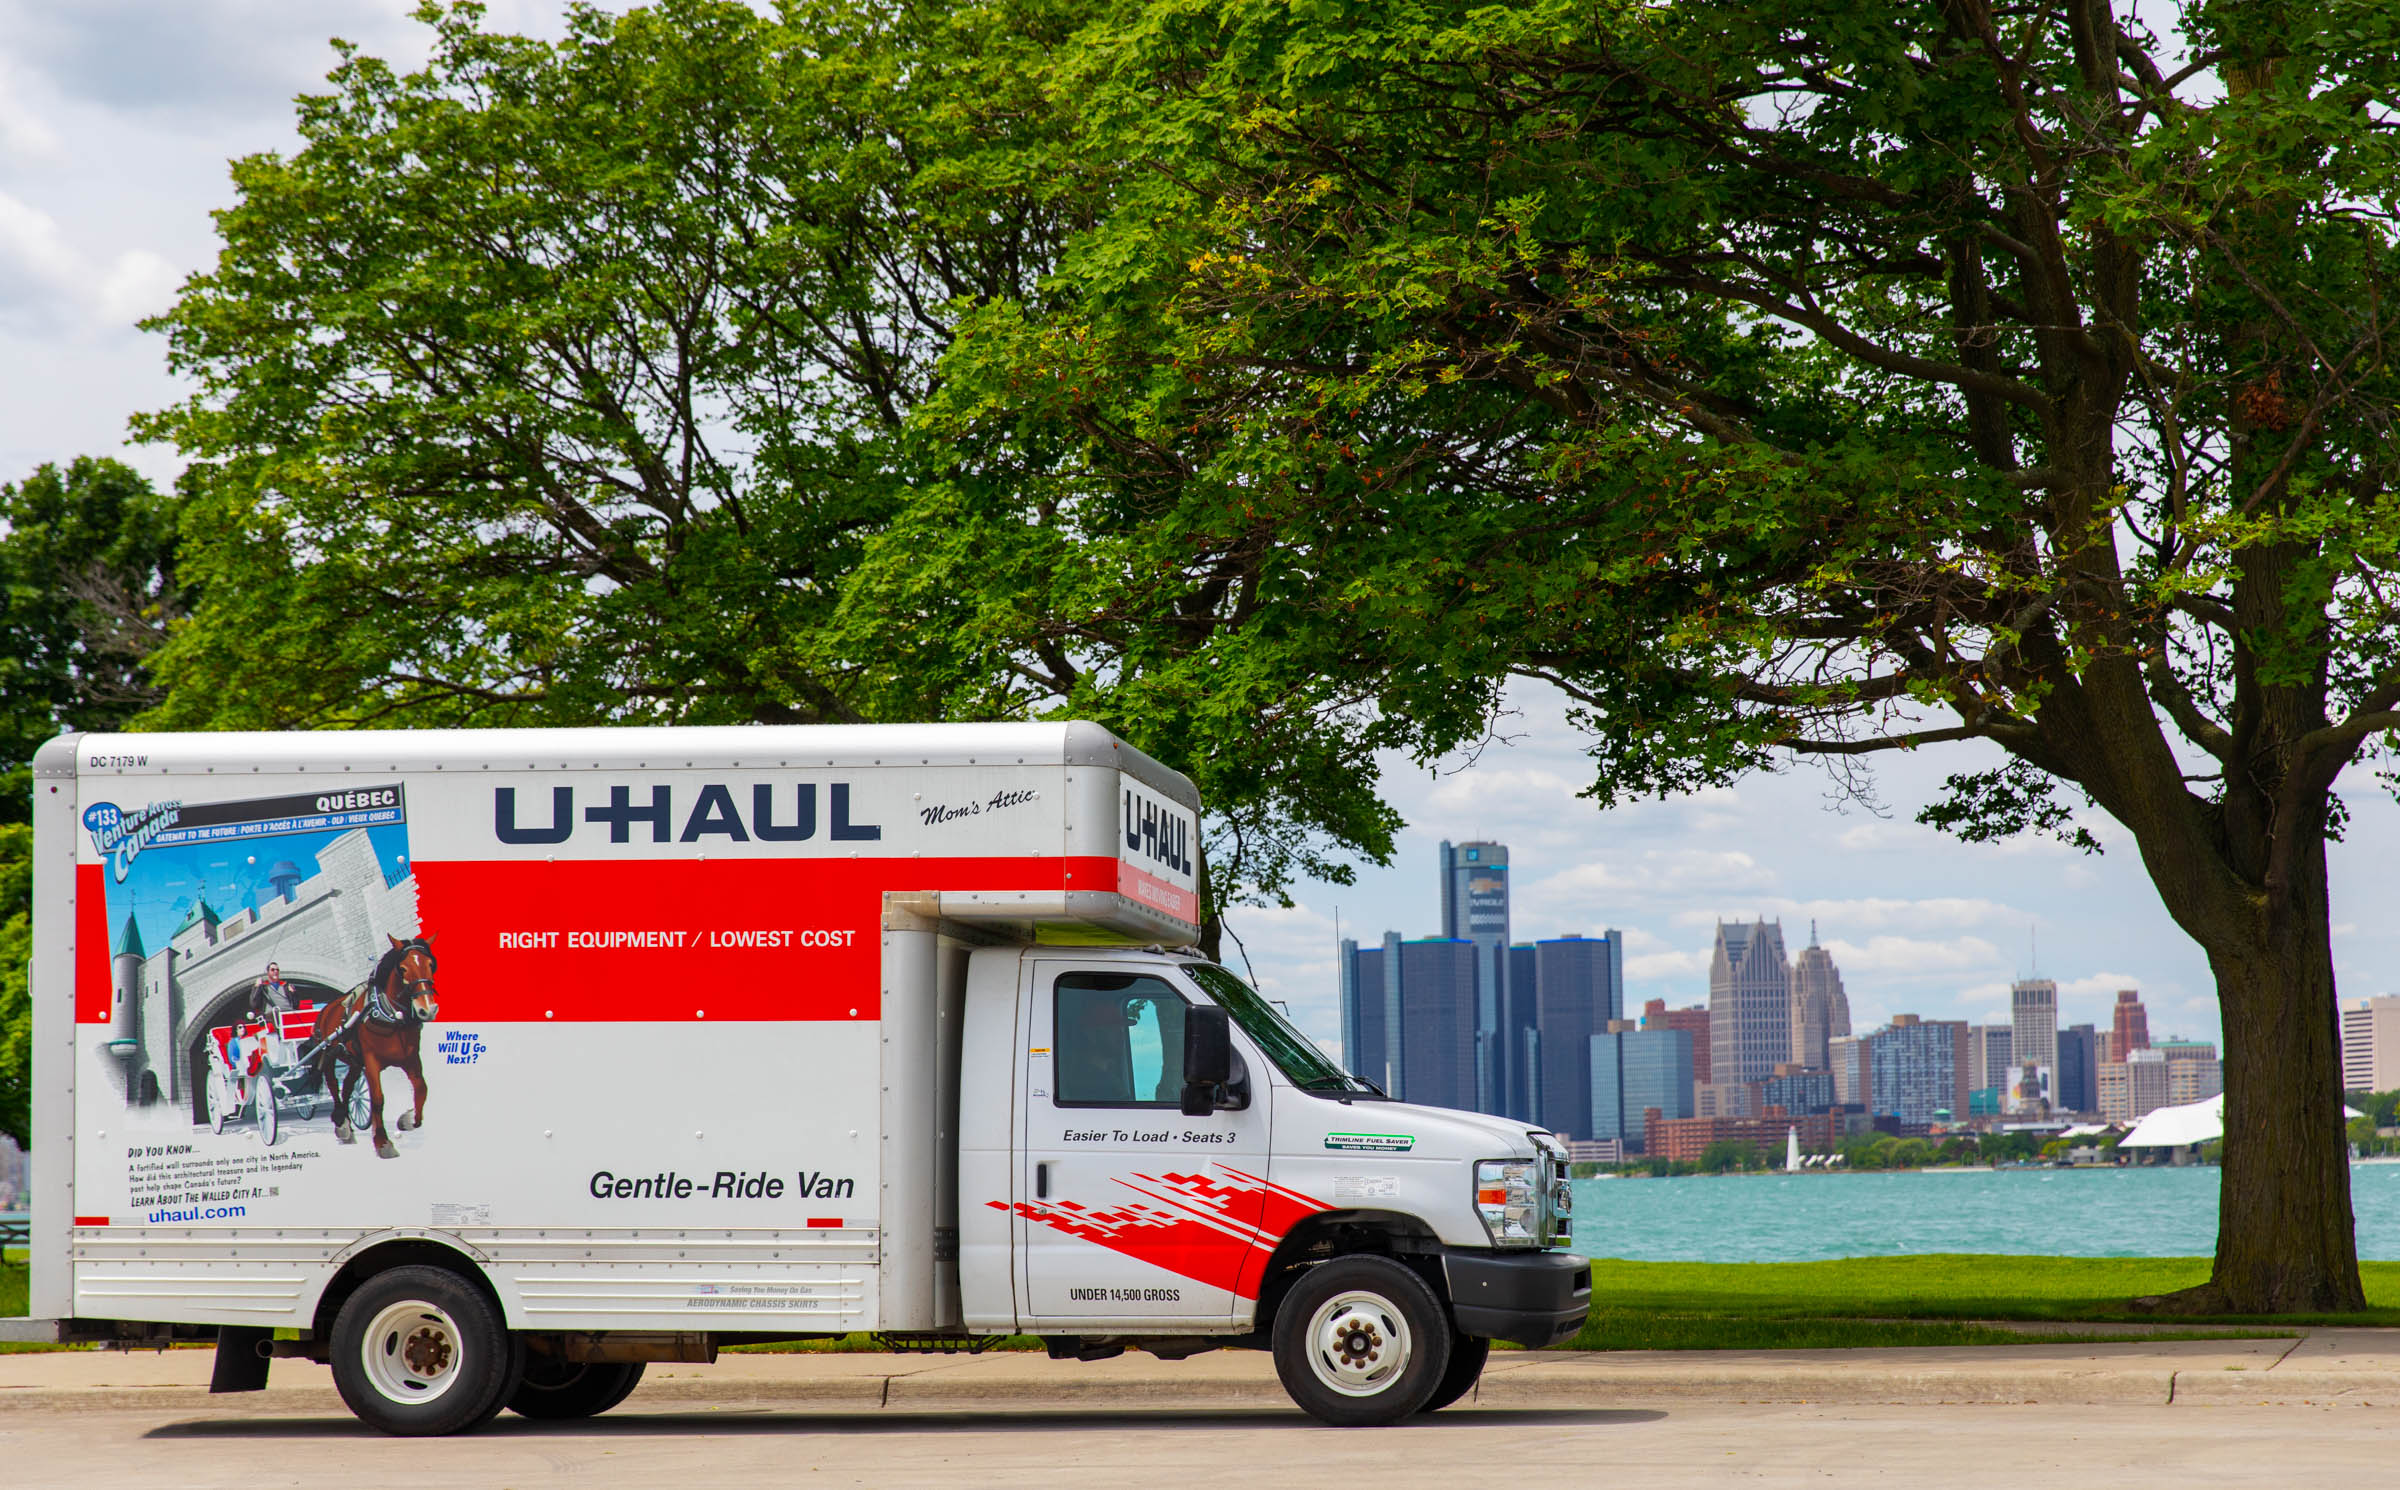 FLORIDA is the No. 2 U-Haul Growth State of 2021